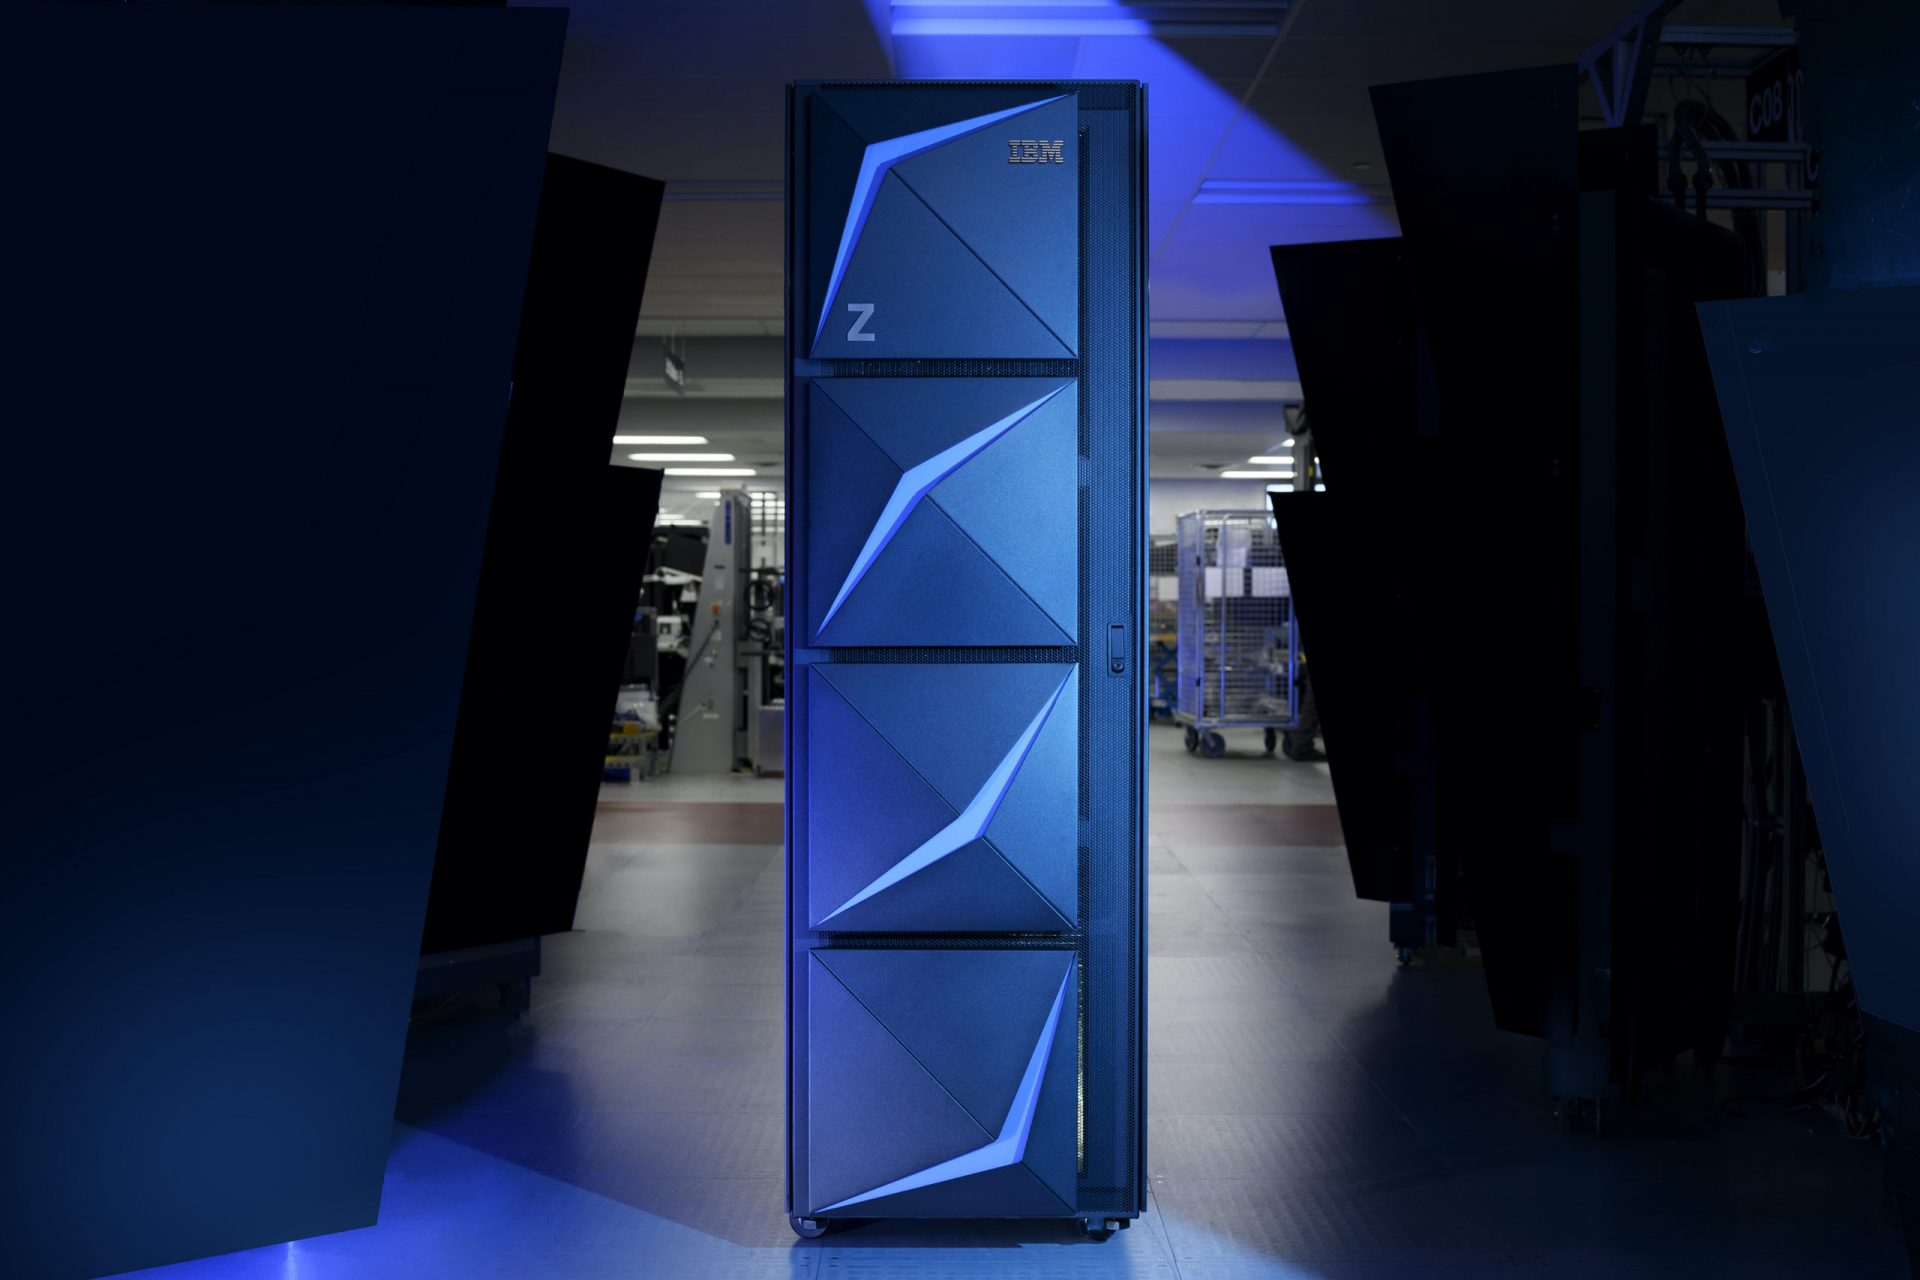 IBM introduces new operating system for IBM Z systems SD Times